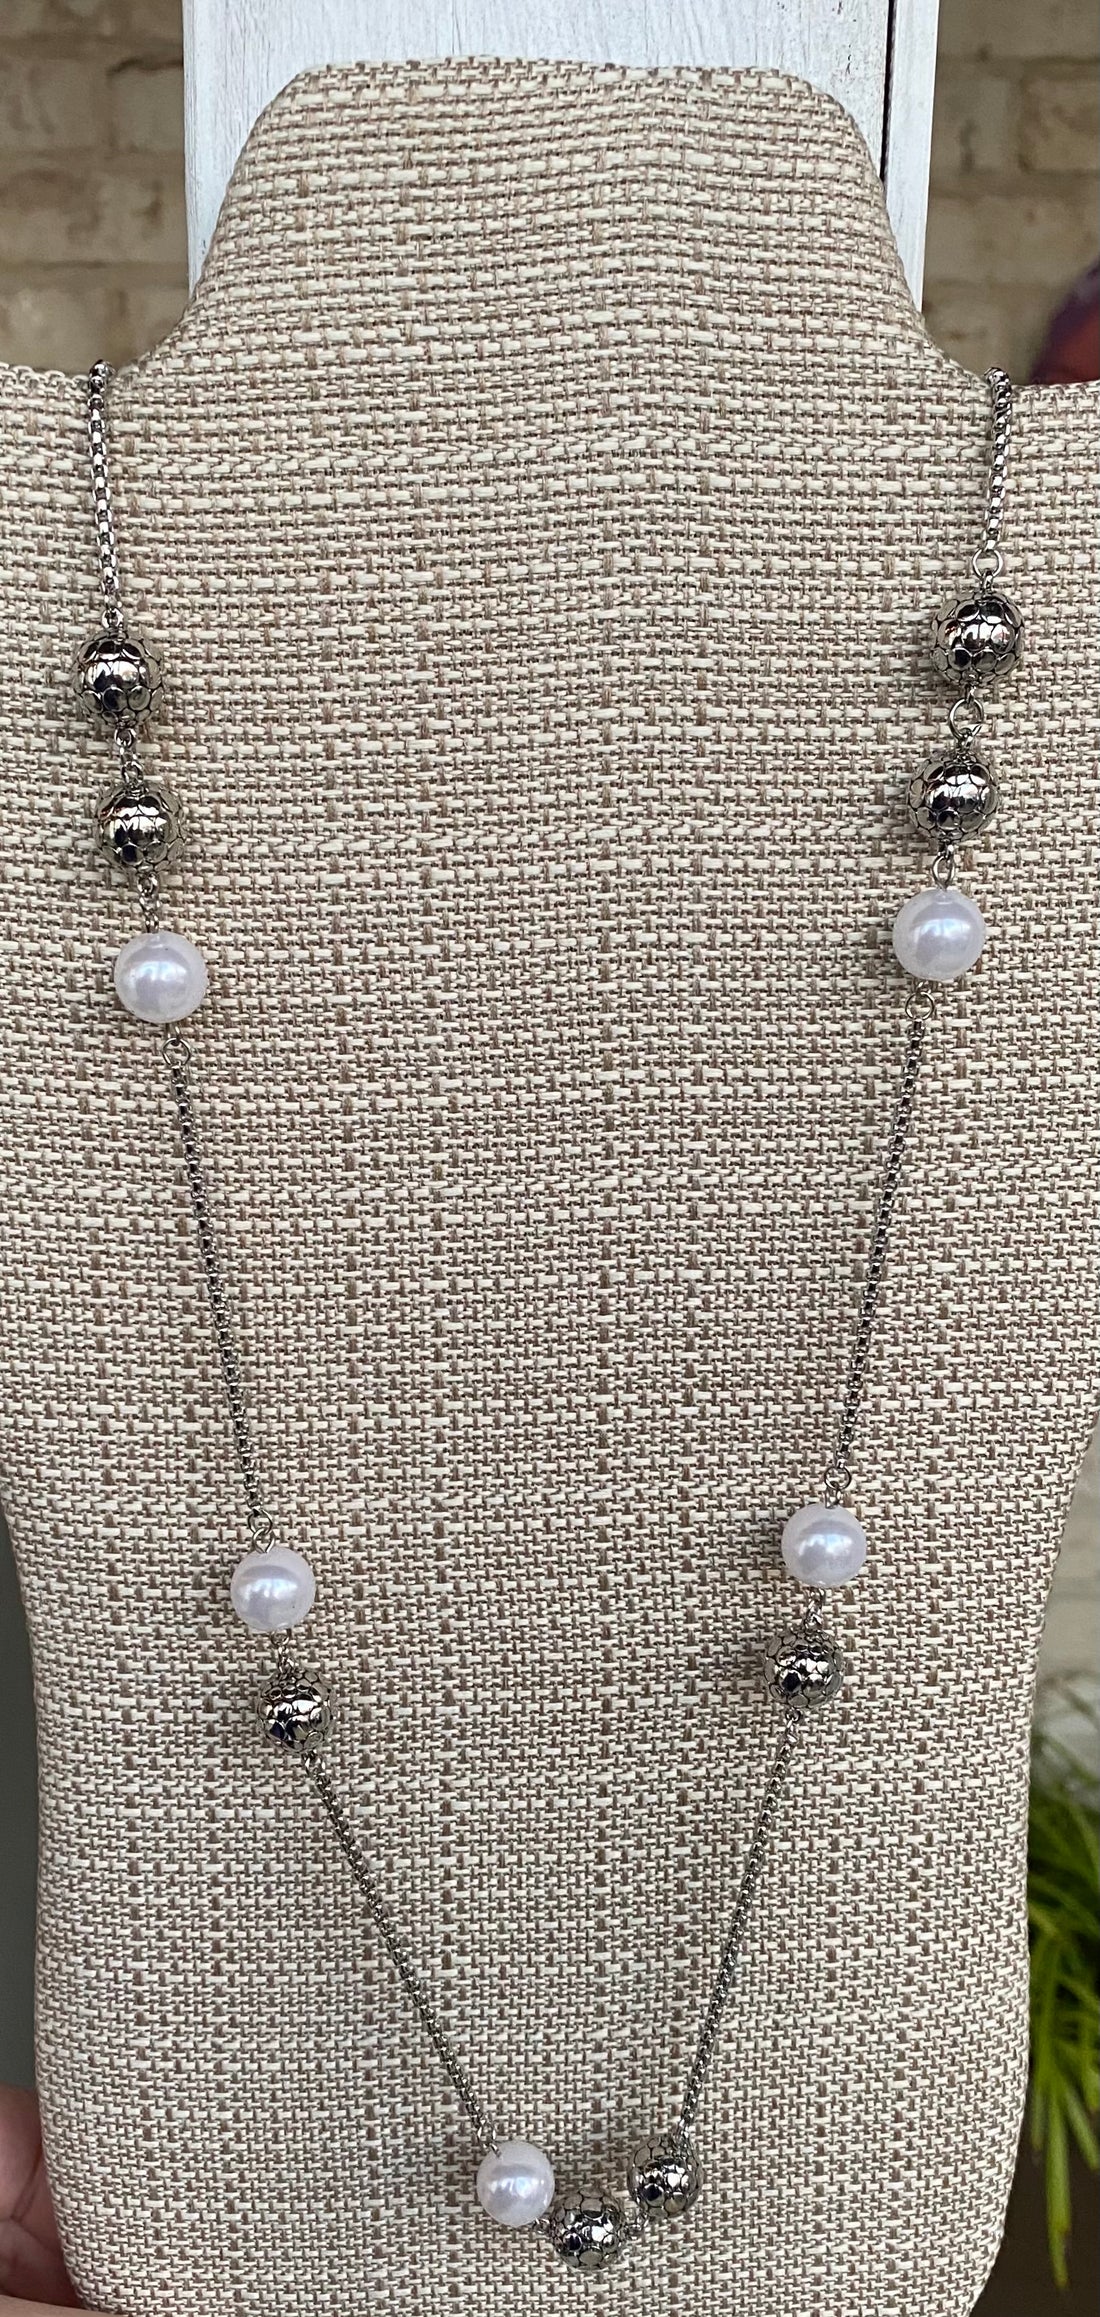 Ball and Pearl Necklace